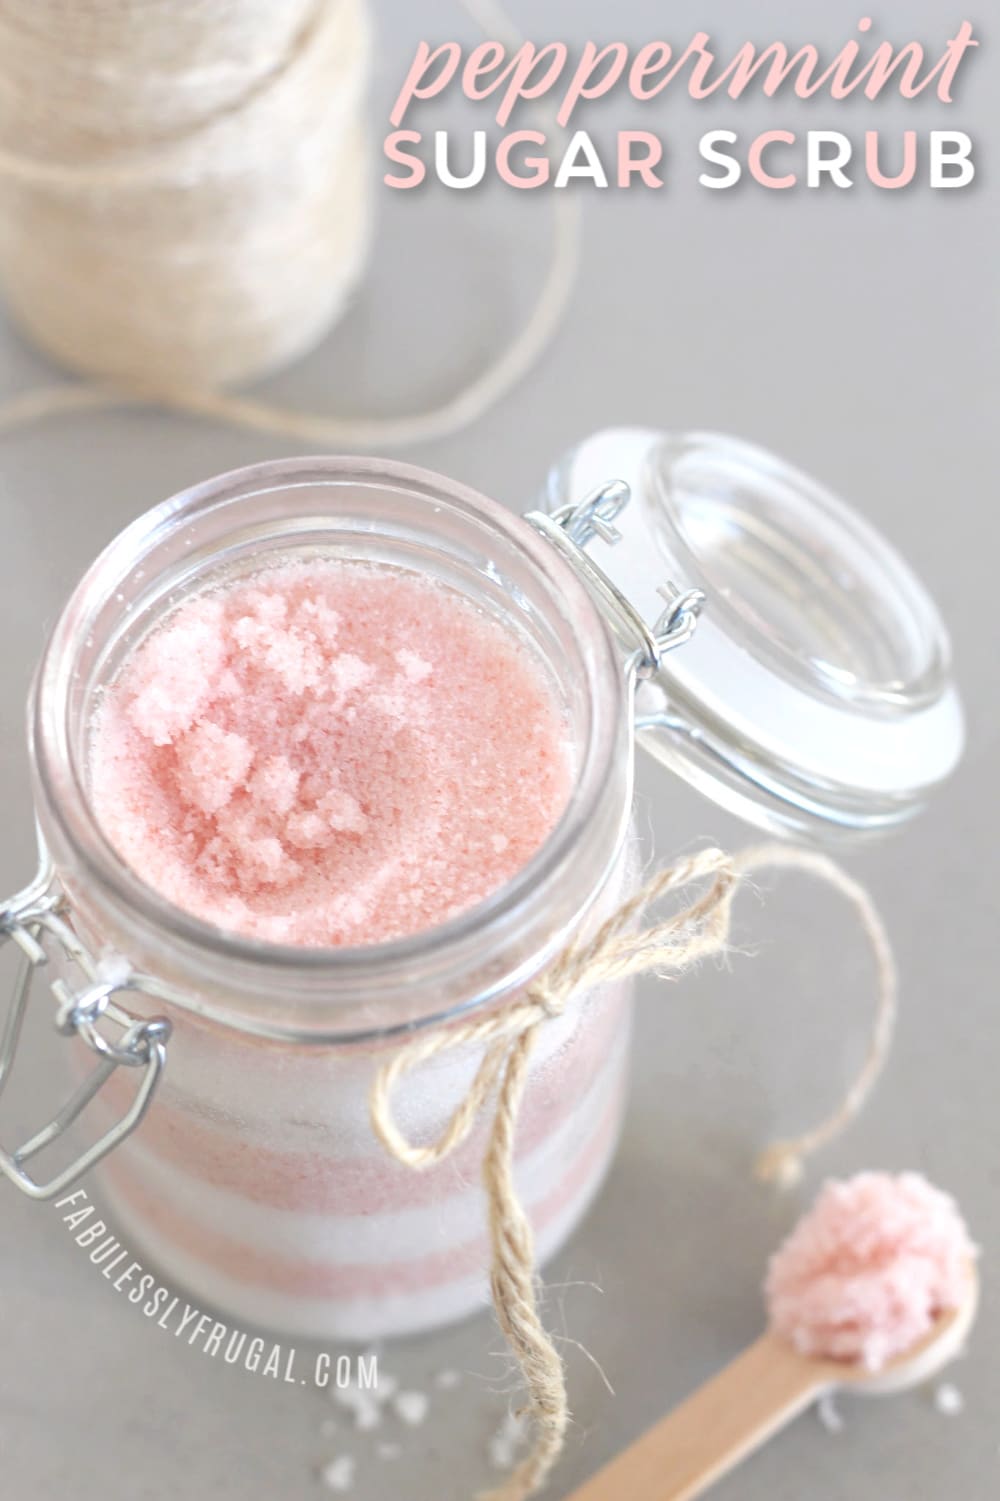 Finished jar of peppermint sugar scrub with wooden spoon